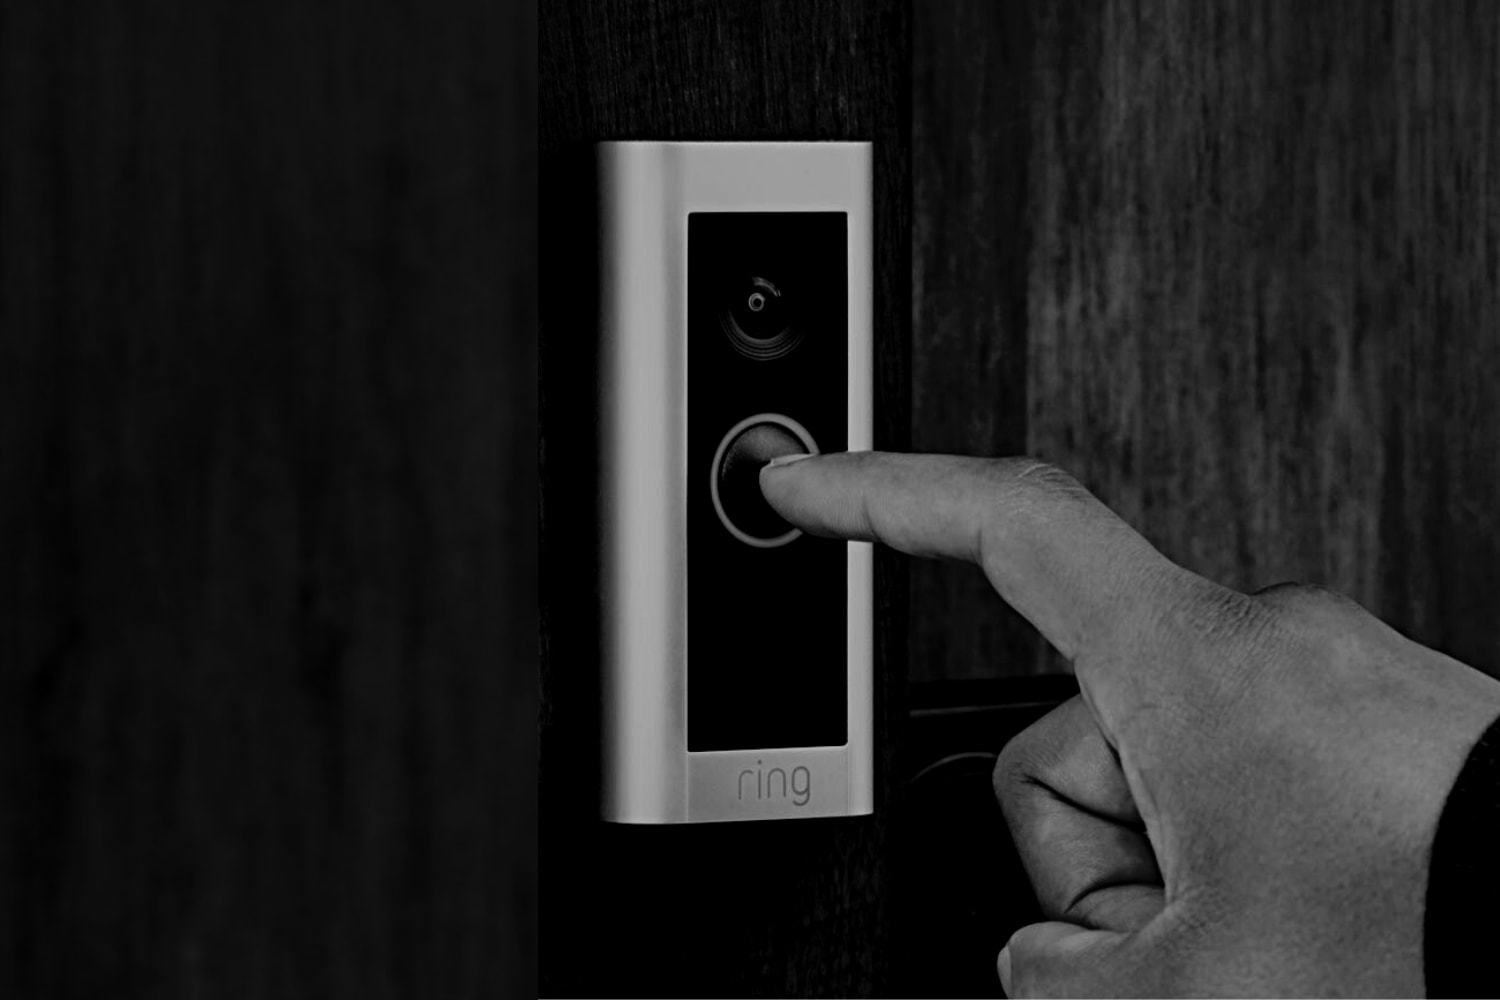 Get a eufy Security video doorbell for under $70